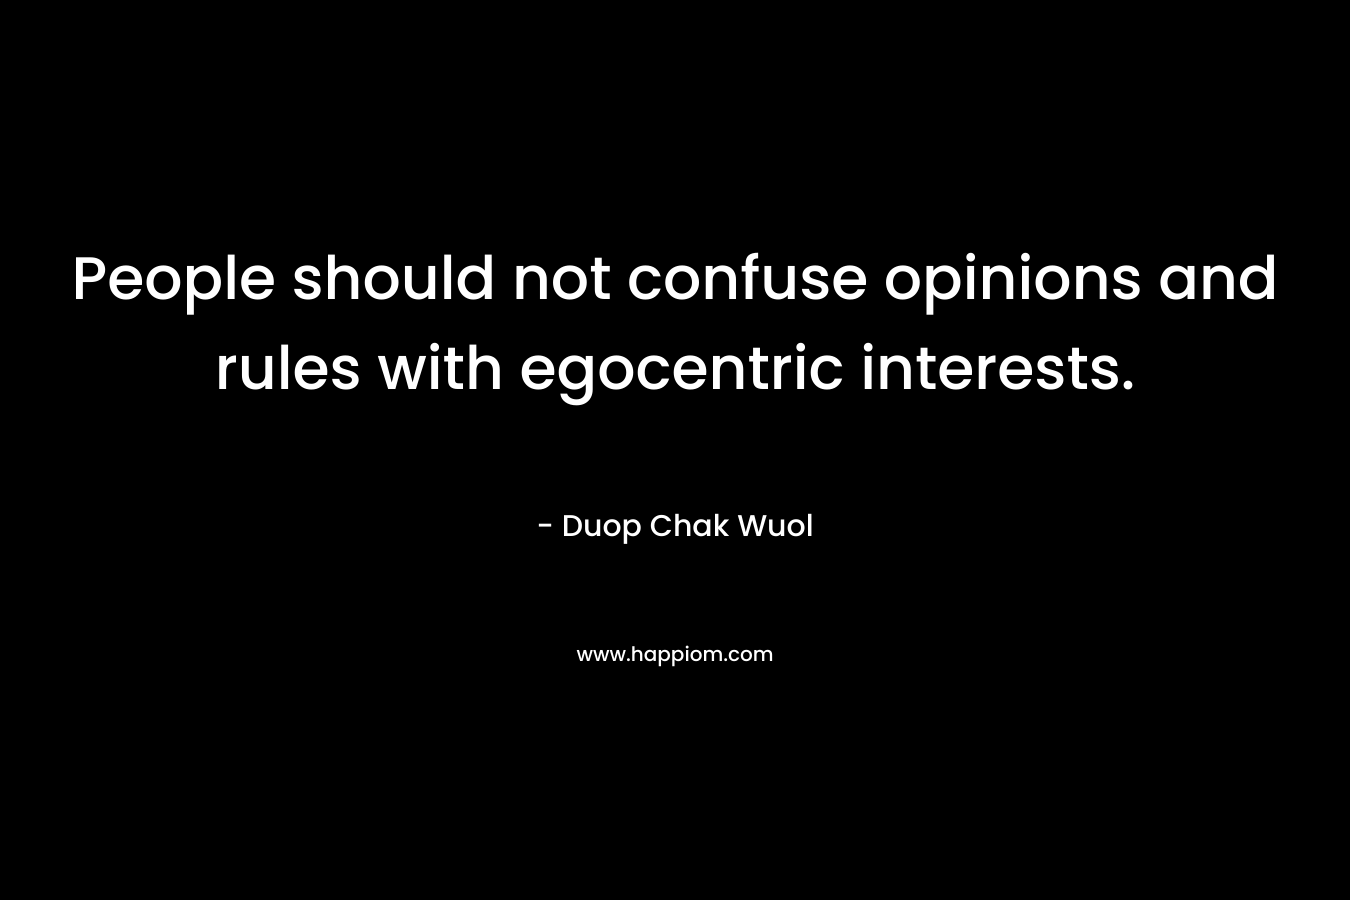 People should not confuse opinions and rules with egocentric interests. – Duop Chak Wuol